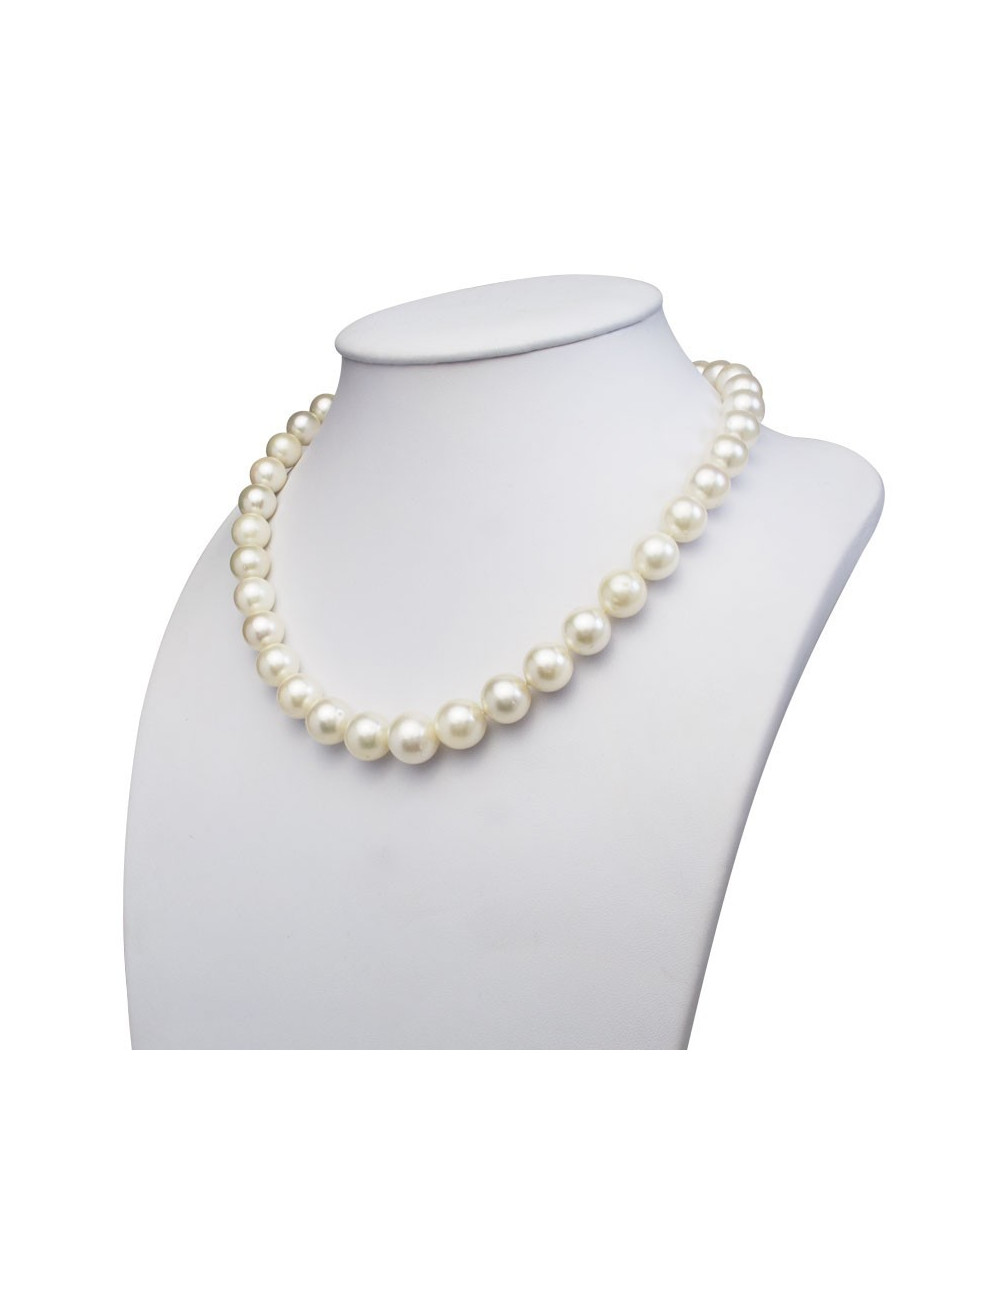 Color Baroque Pearl 18k Gold Necklace 18 inches Luxury South Sea Fashion Natural